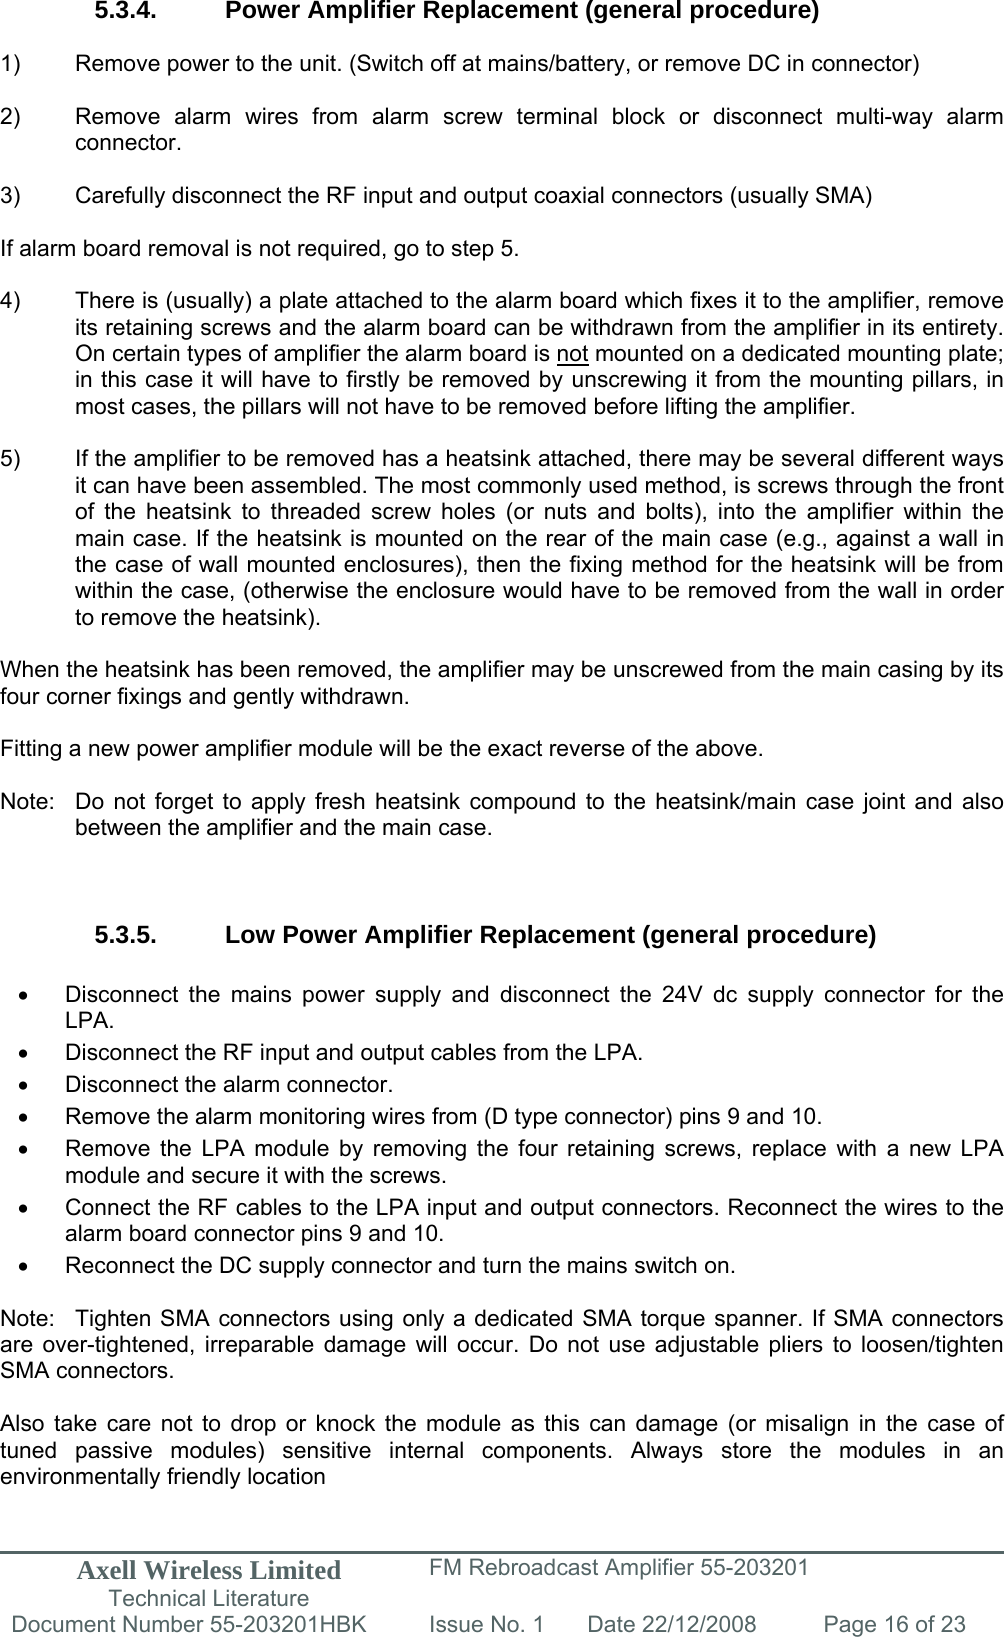 Axell Wireless Limited Technical Literature FM Rebroadcast Amplifier 55-203201 Document Number 55-203201HBK Issue No. 1  Date 22/12/2008  Page 16 of 23   5.3.4.  Power Amplifier Replacement (general procedure)  1)  Remove power to the unit. (Switch off at mains/battery, or remove DC in connector)  2)  Remove alarm wires from alarm screw terminal block or disconnect multi-way alarm connector.  3)  Carefully disconnect the RF input and output coaxial connectors (usually SMA)  If alarm board removal is not required, go to step 5.  4)  There is (usually) a plate attached to the alarm board which fixes it to the amplifier, remove its retaining screws and the alarm board can be withdrawn from the amplifier in its entirety. On certain types of amplifier the alarm board is not mounted on a dedicated mounting plate; in this case it will have to firstly be removed by unscrewing it from the mounting pillars, in most cases, the pillars will not have to be removed before lifting the amplifier.  5)  If the amplifier to be removed has a heatsink attached, there may be several different ways it can have been assembled. The most commonly used method, is screws through the front of the heatsink to threaded screw holes (or nuts and bolts), into the amplifier within the main case. If the heatsink is mounted on the rear of the main case (e.g., against a wall in the case of wall mounted enclosures), then the fixing method for the heatsink will be from within the case, (otherwise the enclosure would have to be removed from the wall in order to remove the heatsink).  When the heatsink has been removed, the amplifier may be unscrewed from the main casing by its four corner fixings and gently withdrawn.  Fitting a new power amplifier module will be the exact reverse of the above.  Note:  Do not forget to apply fresh heatsink compound to the heatsink/main case joint and also   between the amplifier and the main case.    5.3.5.  Low Power Amplifier Replacement (general procedure)  •  Disconnect the mains power supply and disconnect the 24V dc supply connector for the LPA. •  Disconnect the RF input and output cables from the LPA. •  Disconnect the alarm connector. •  Remove the alarm monitoring wires from (D type connector) pins 9 and 10. •  Remove the LPA module by removing the four retaining screws, replace with a new LPA module and secure it with the screws. •  Connect the RF cables to the LPA input and output connectors. Reconnect the wires to the alarm board connector pins 9 and 10. •  Reconnect the DC supply connector and turn the mains switch on.  Note:  Tighten SMA connectors using only a dedicated SMA torque spanner. If SMA connectors are over-tightened, irreparable damage will occur. Do not use adjustable pliers to loosen/tighten SMA connectors.  Also take care not to drop or knock the module as this can damage (or misalign in the case of tuned passive modules) sensitive internal components. Always store the modules in an environmentally friendly location 